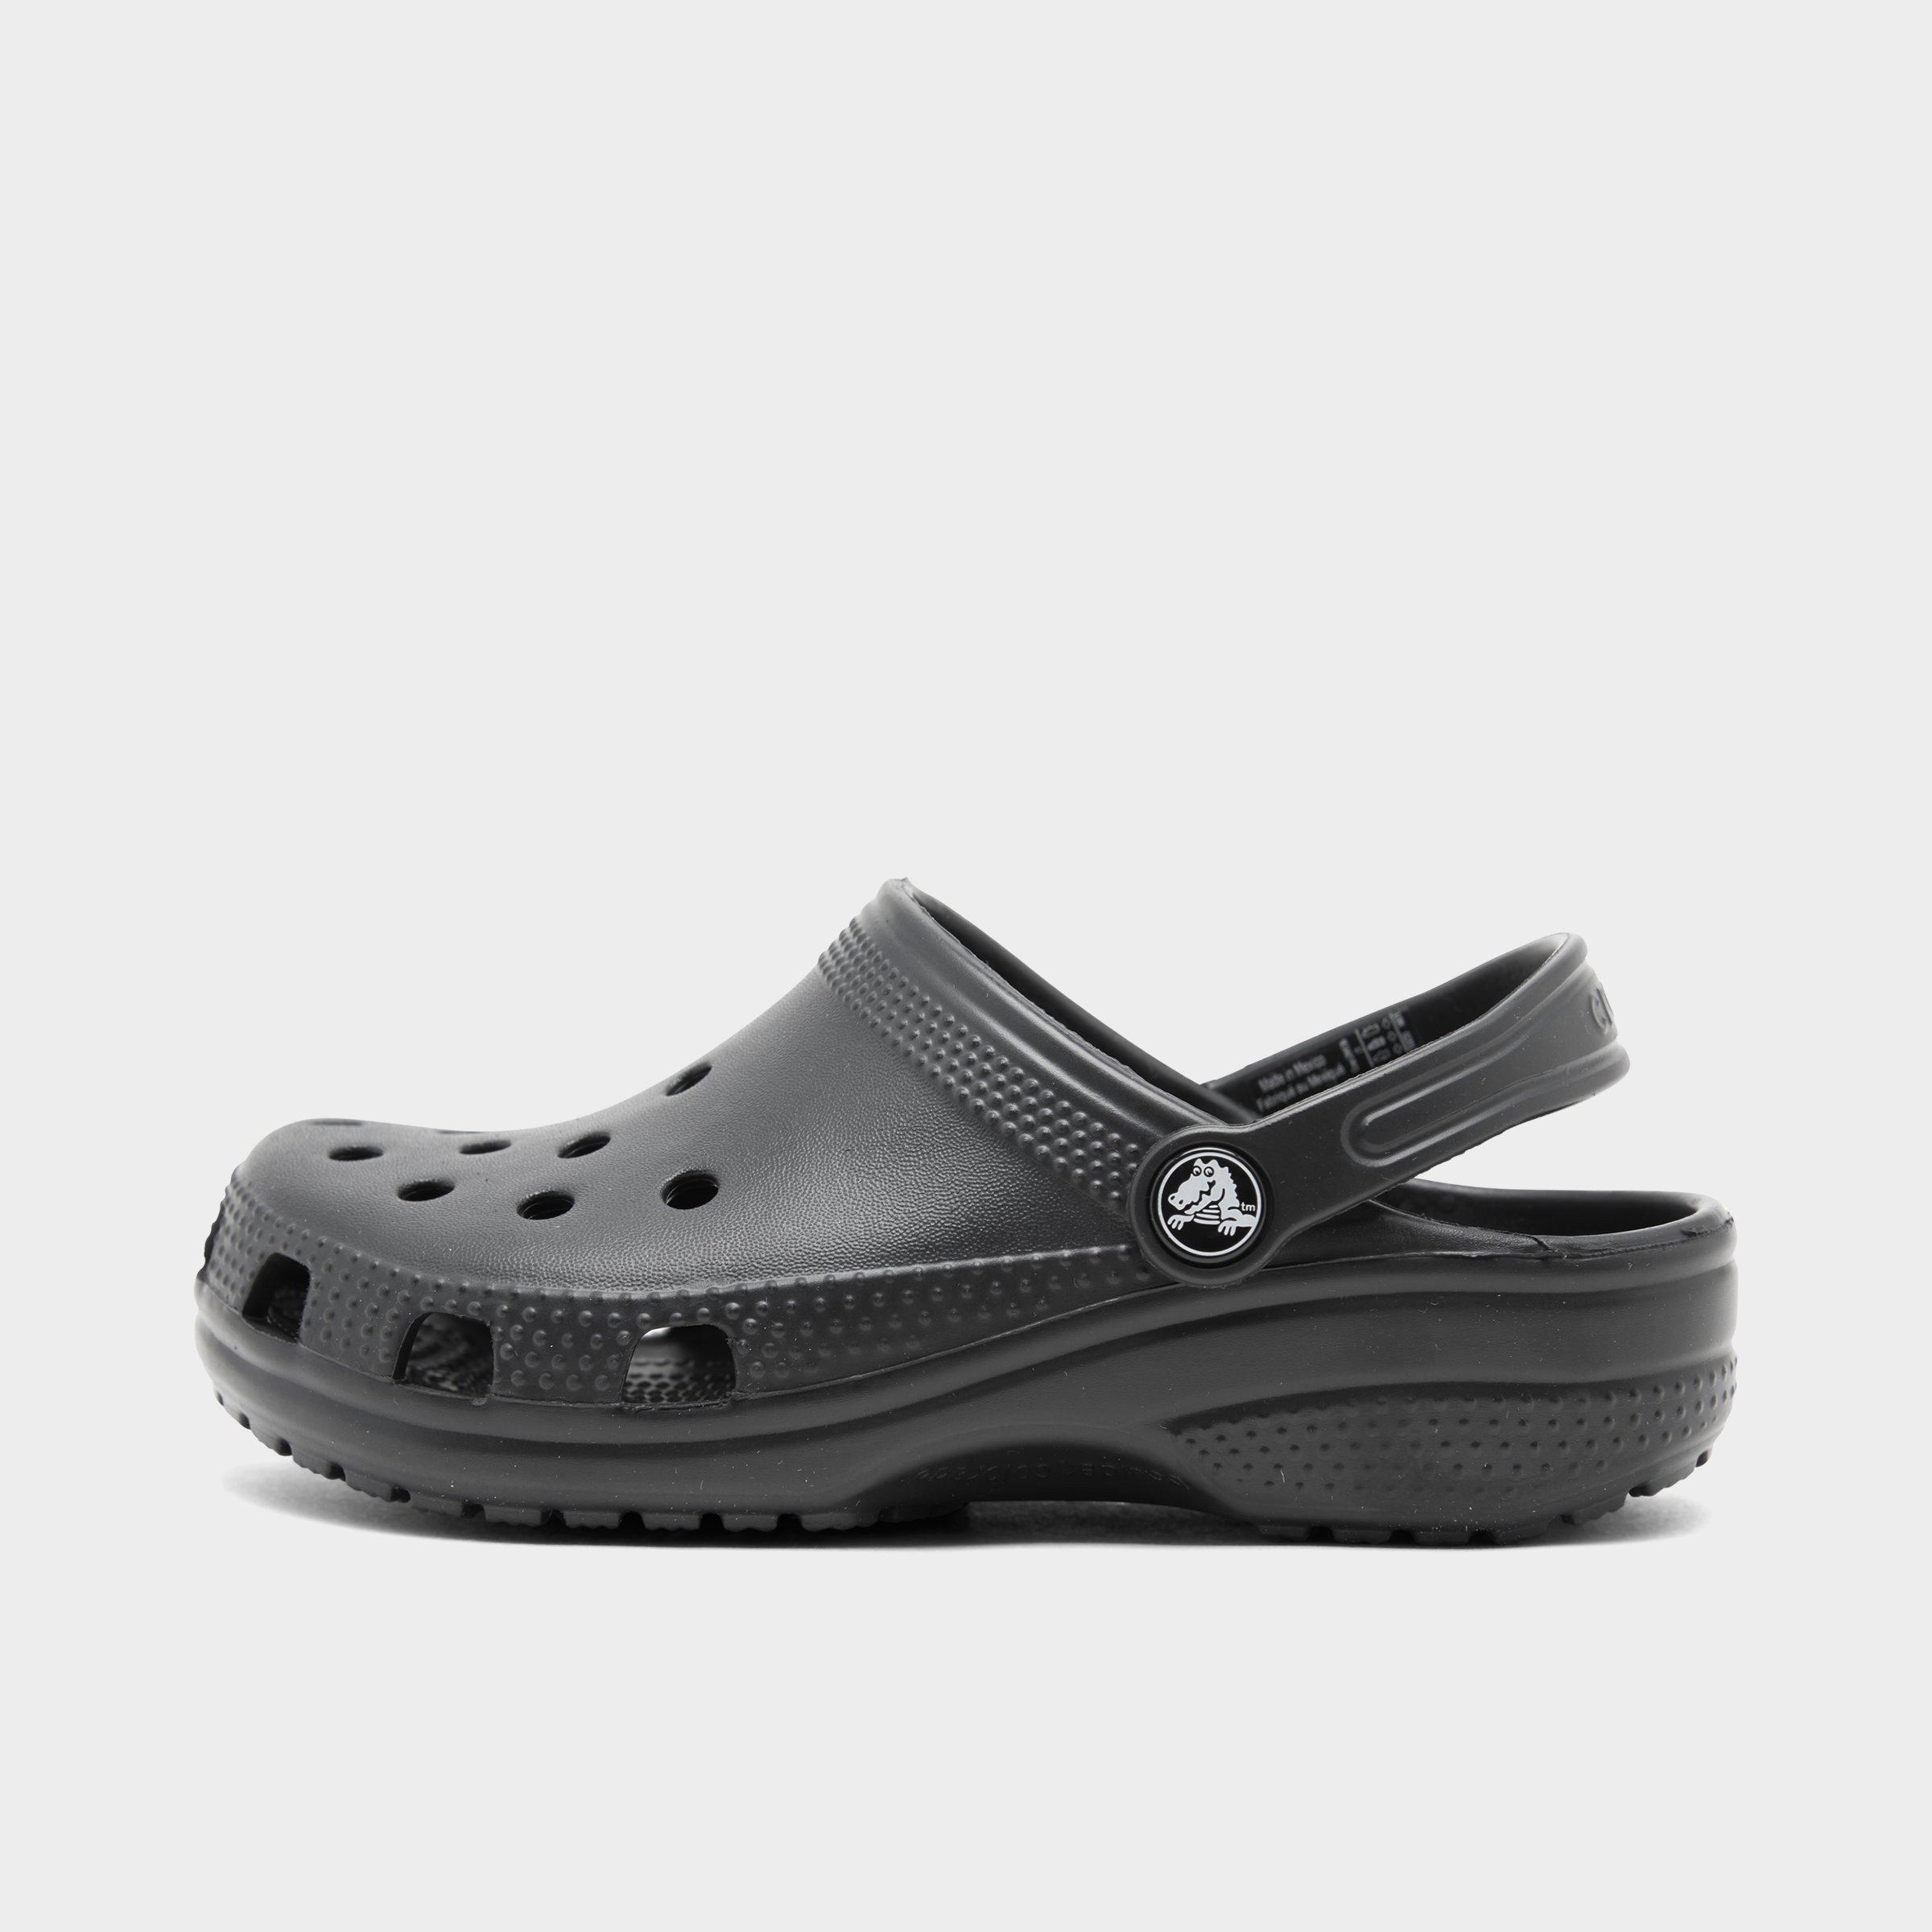 crocs pick up in store